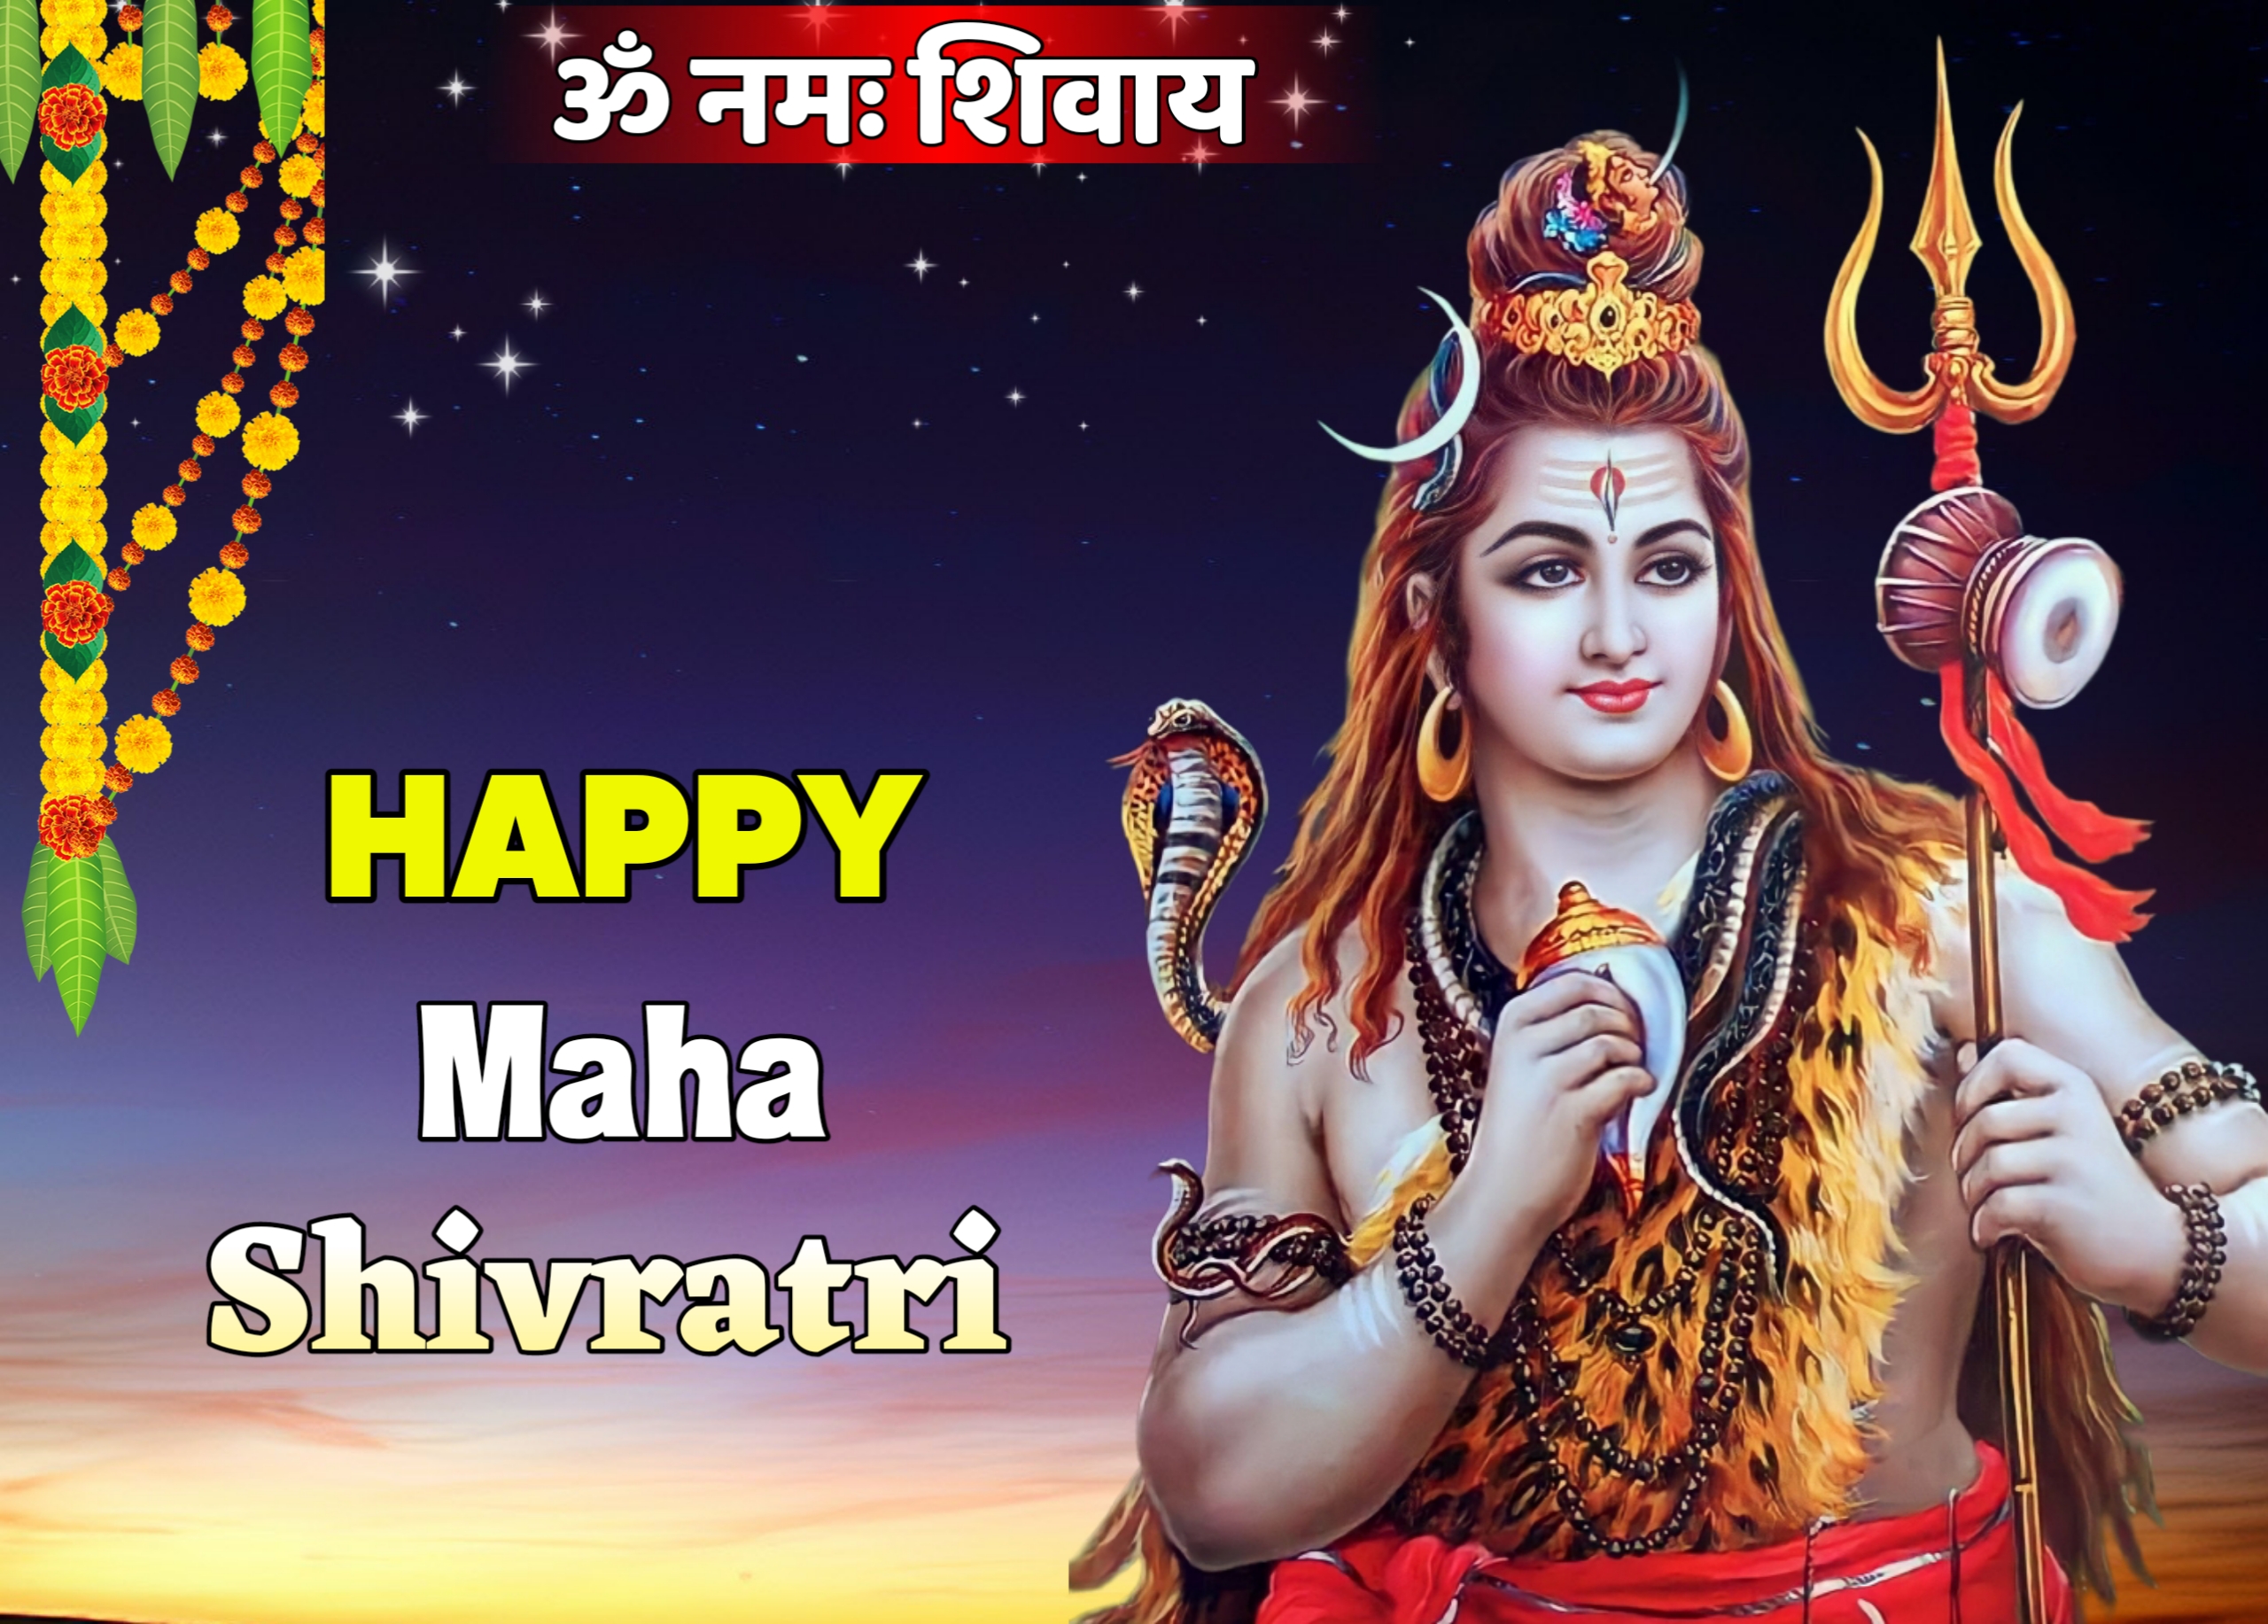 100+ Maha Shivratri Images And Photos Stocks - BRD Pictures